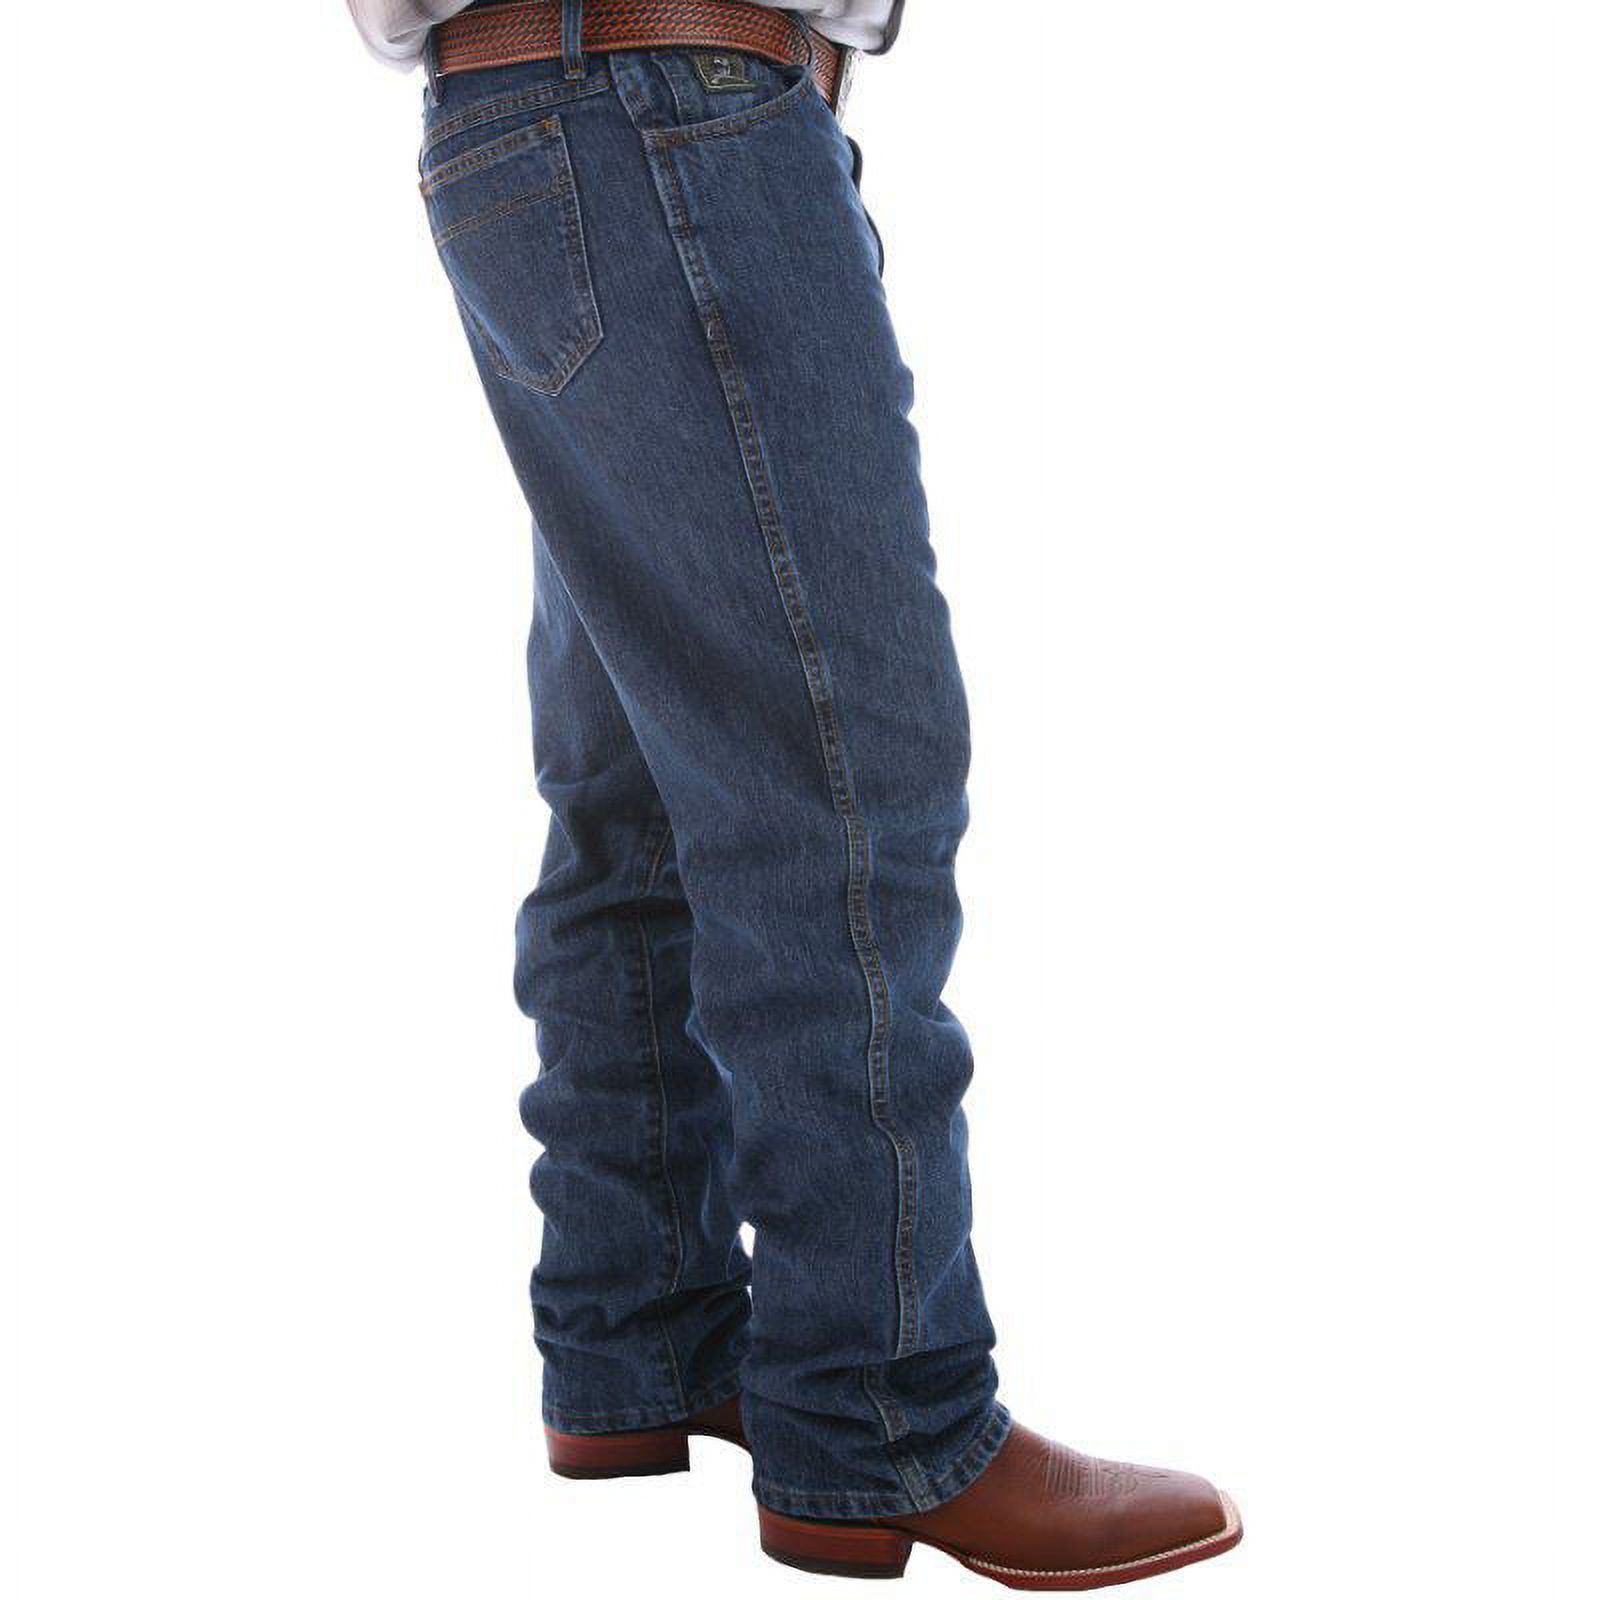 Cinch Men's Green Label Relaxed Fit Dark Stonewash Jeans Dark Stone 28W x 32L  US - image 4 of 4